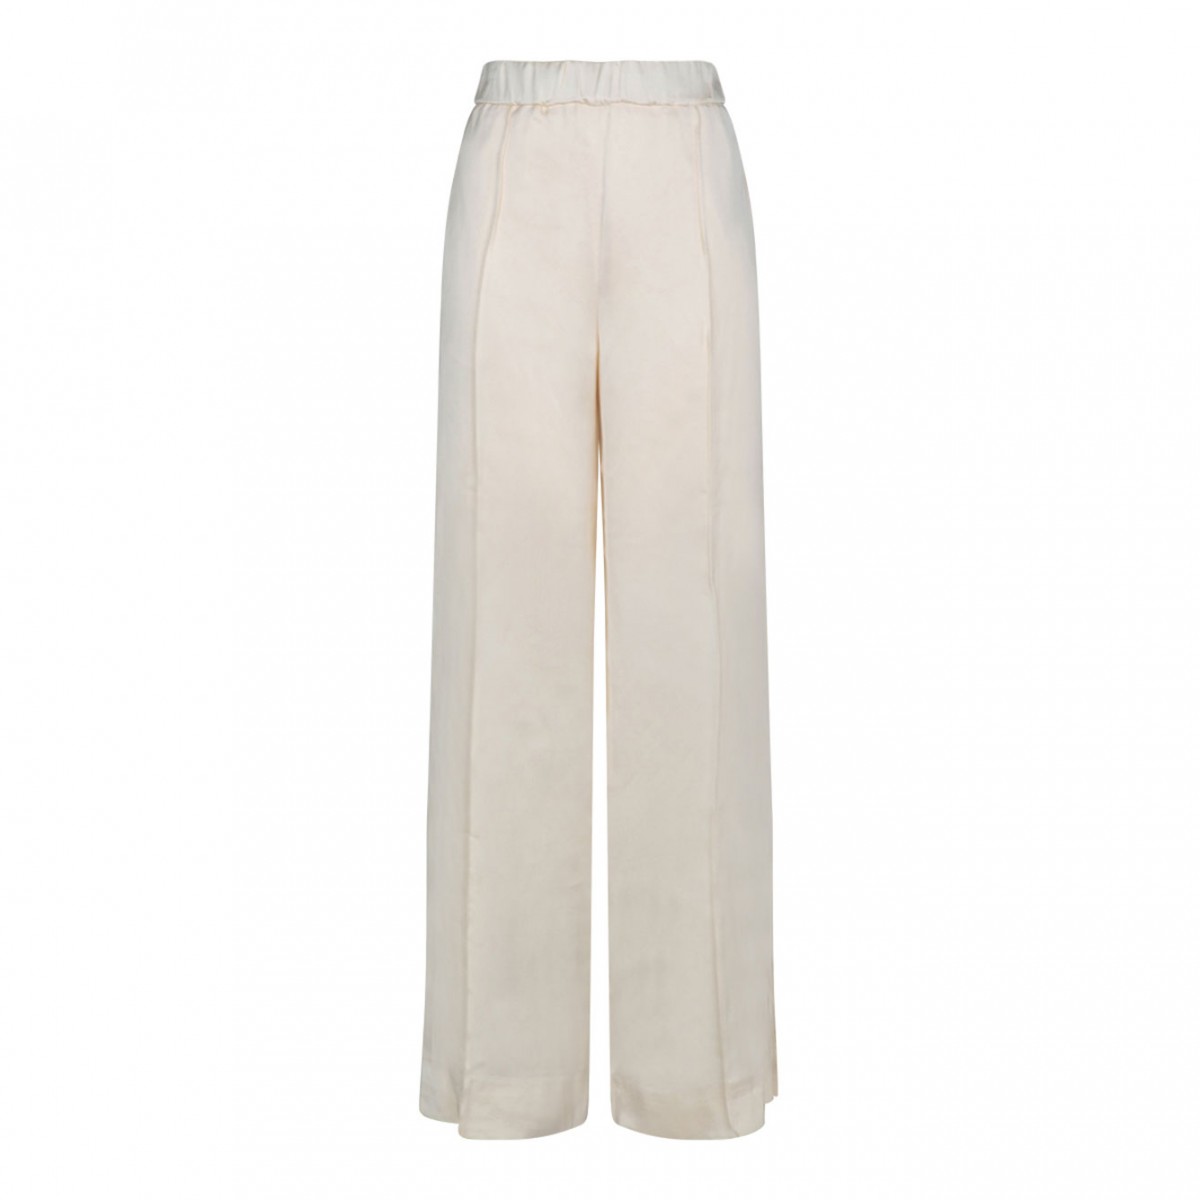 Milk Track Inspired Trousers